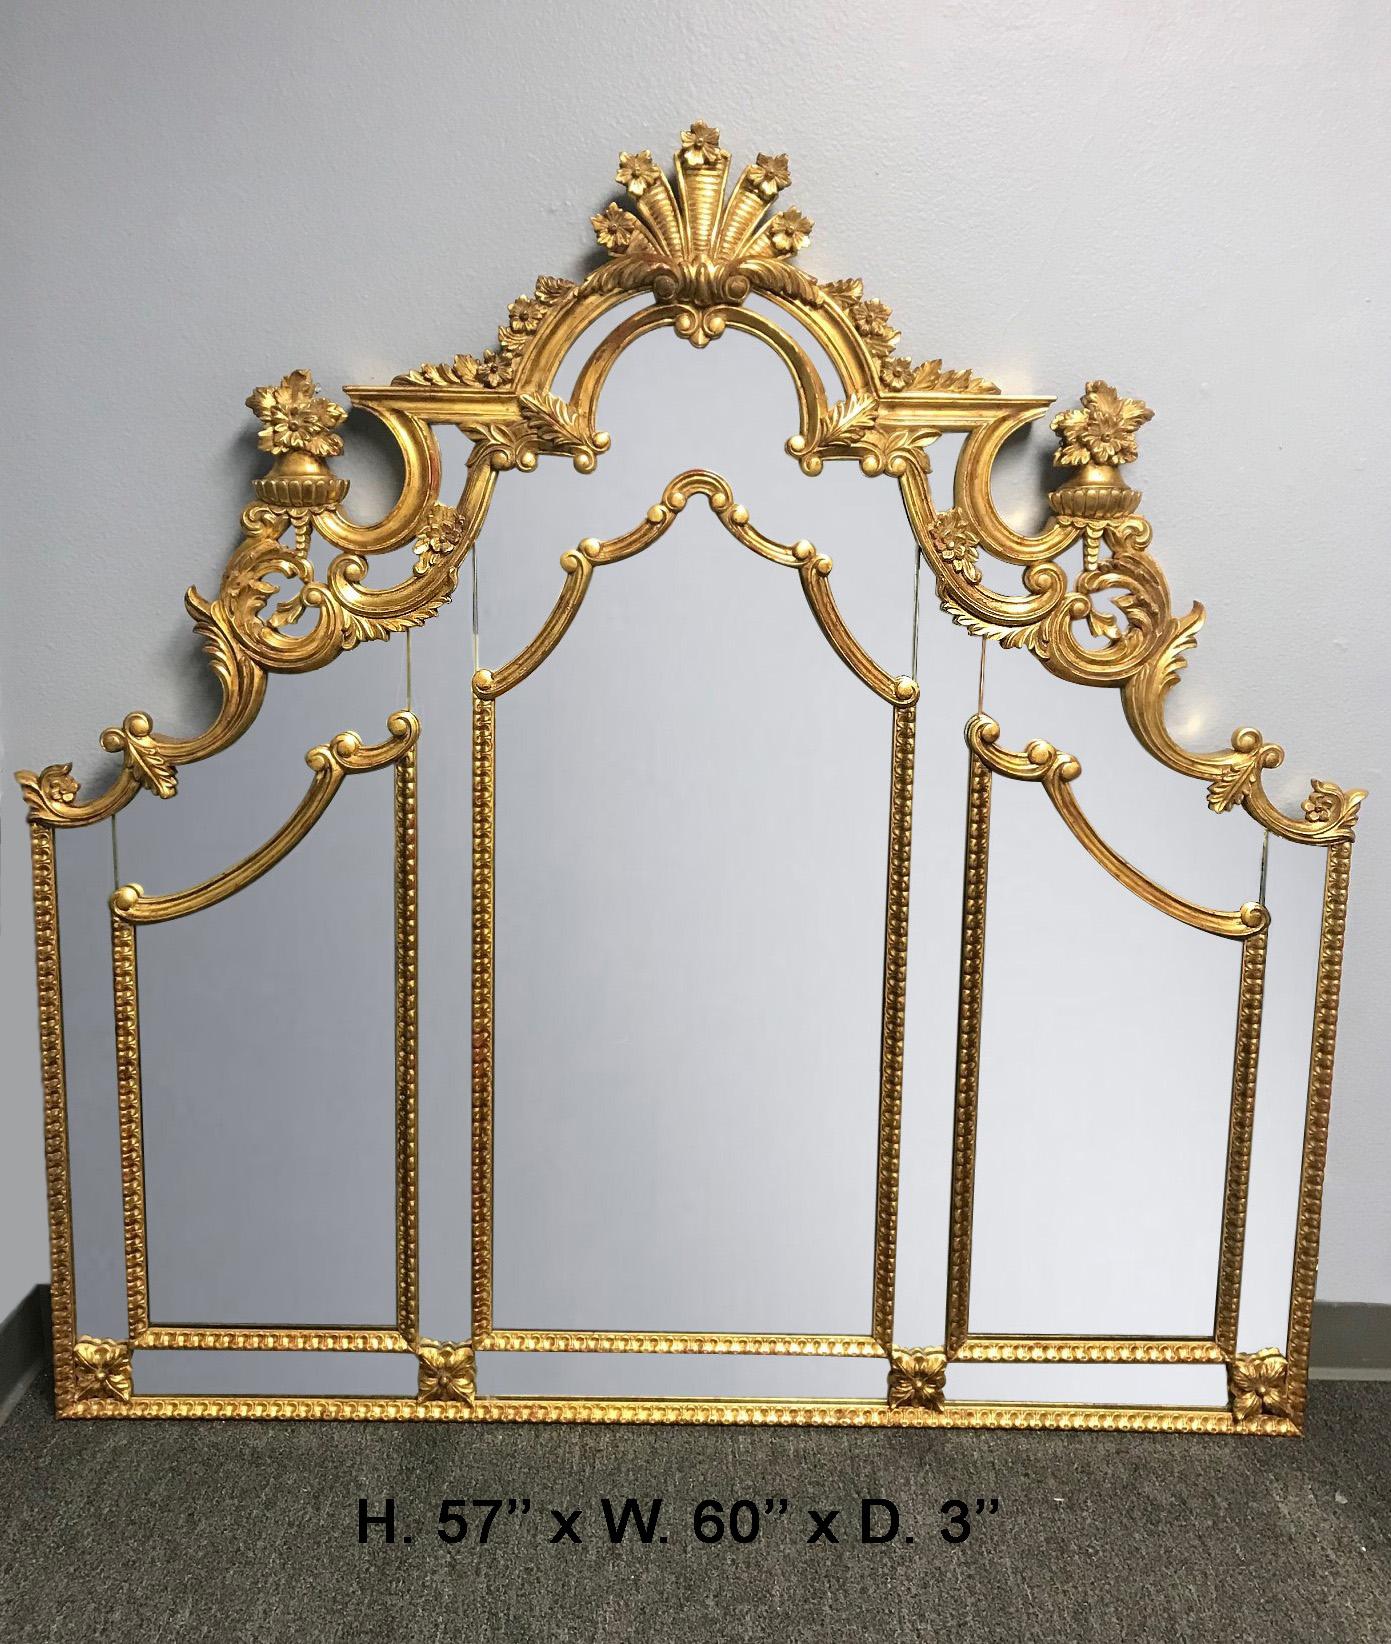 An impressive French carved giltwood and mirrored headboard, late 20th century. 

The headboard is surmounted by a shaped Rocaille motif giltwood crest decorated in shells and foliage, above a conforming mirror plate with three gilt mirrored